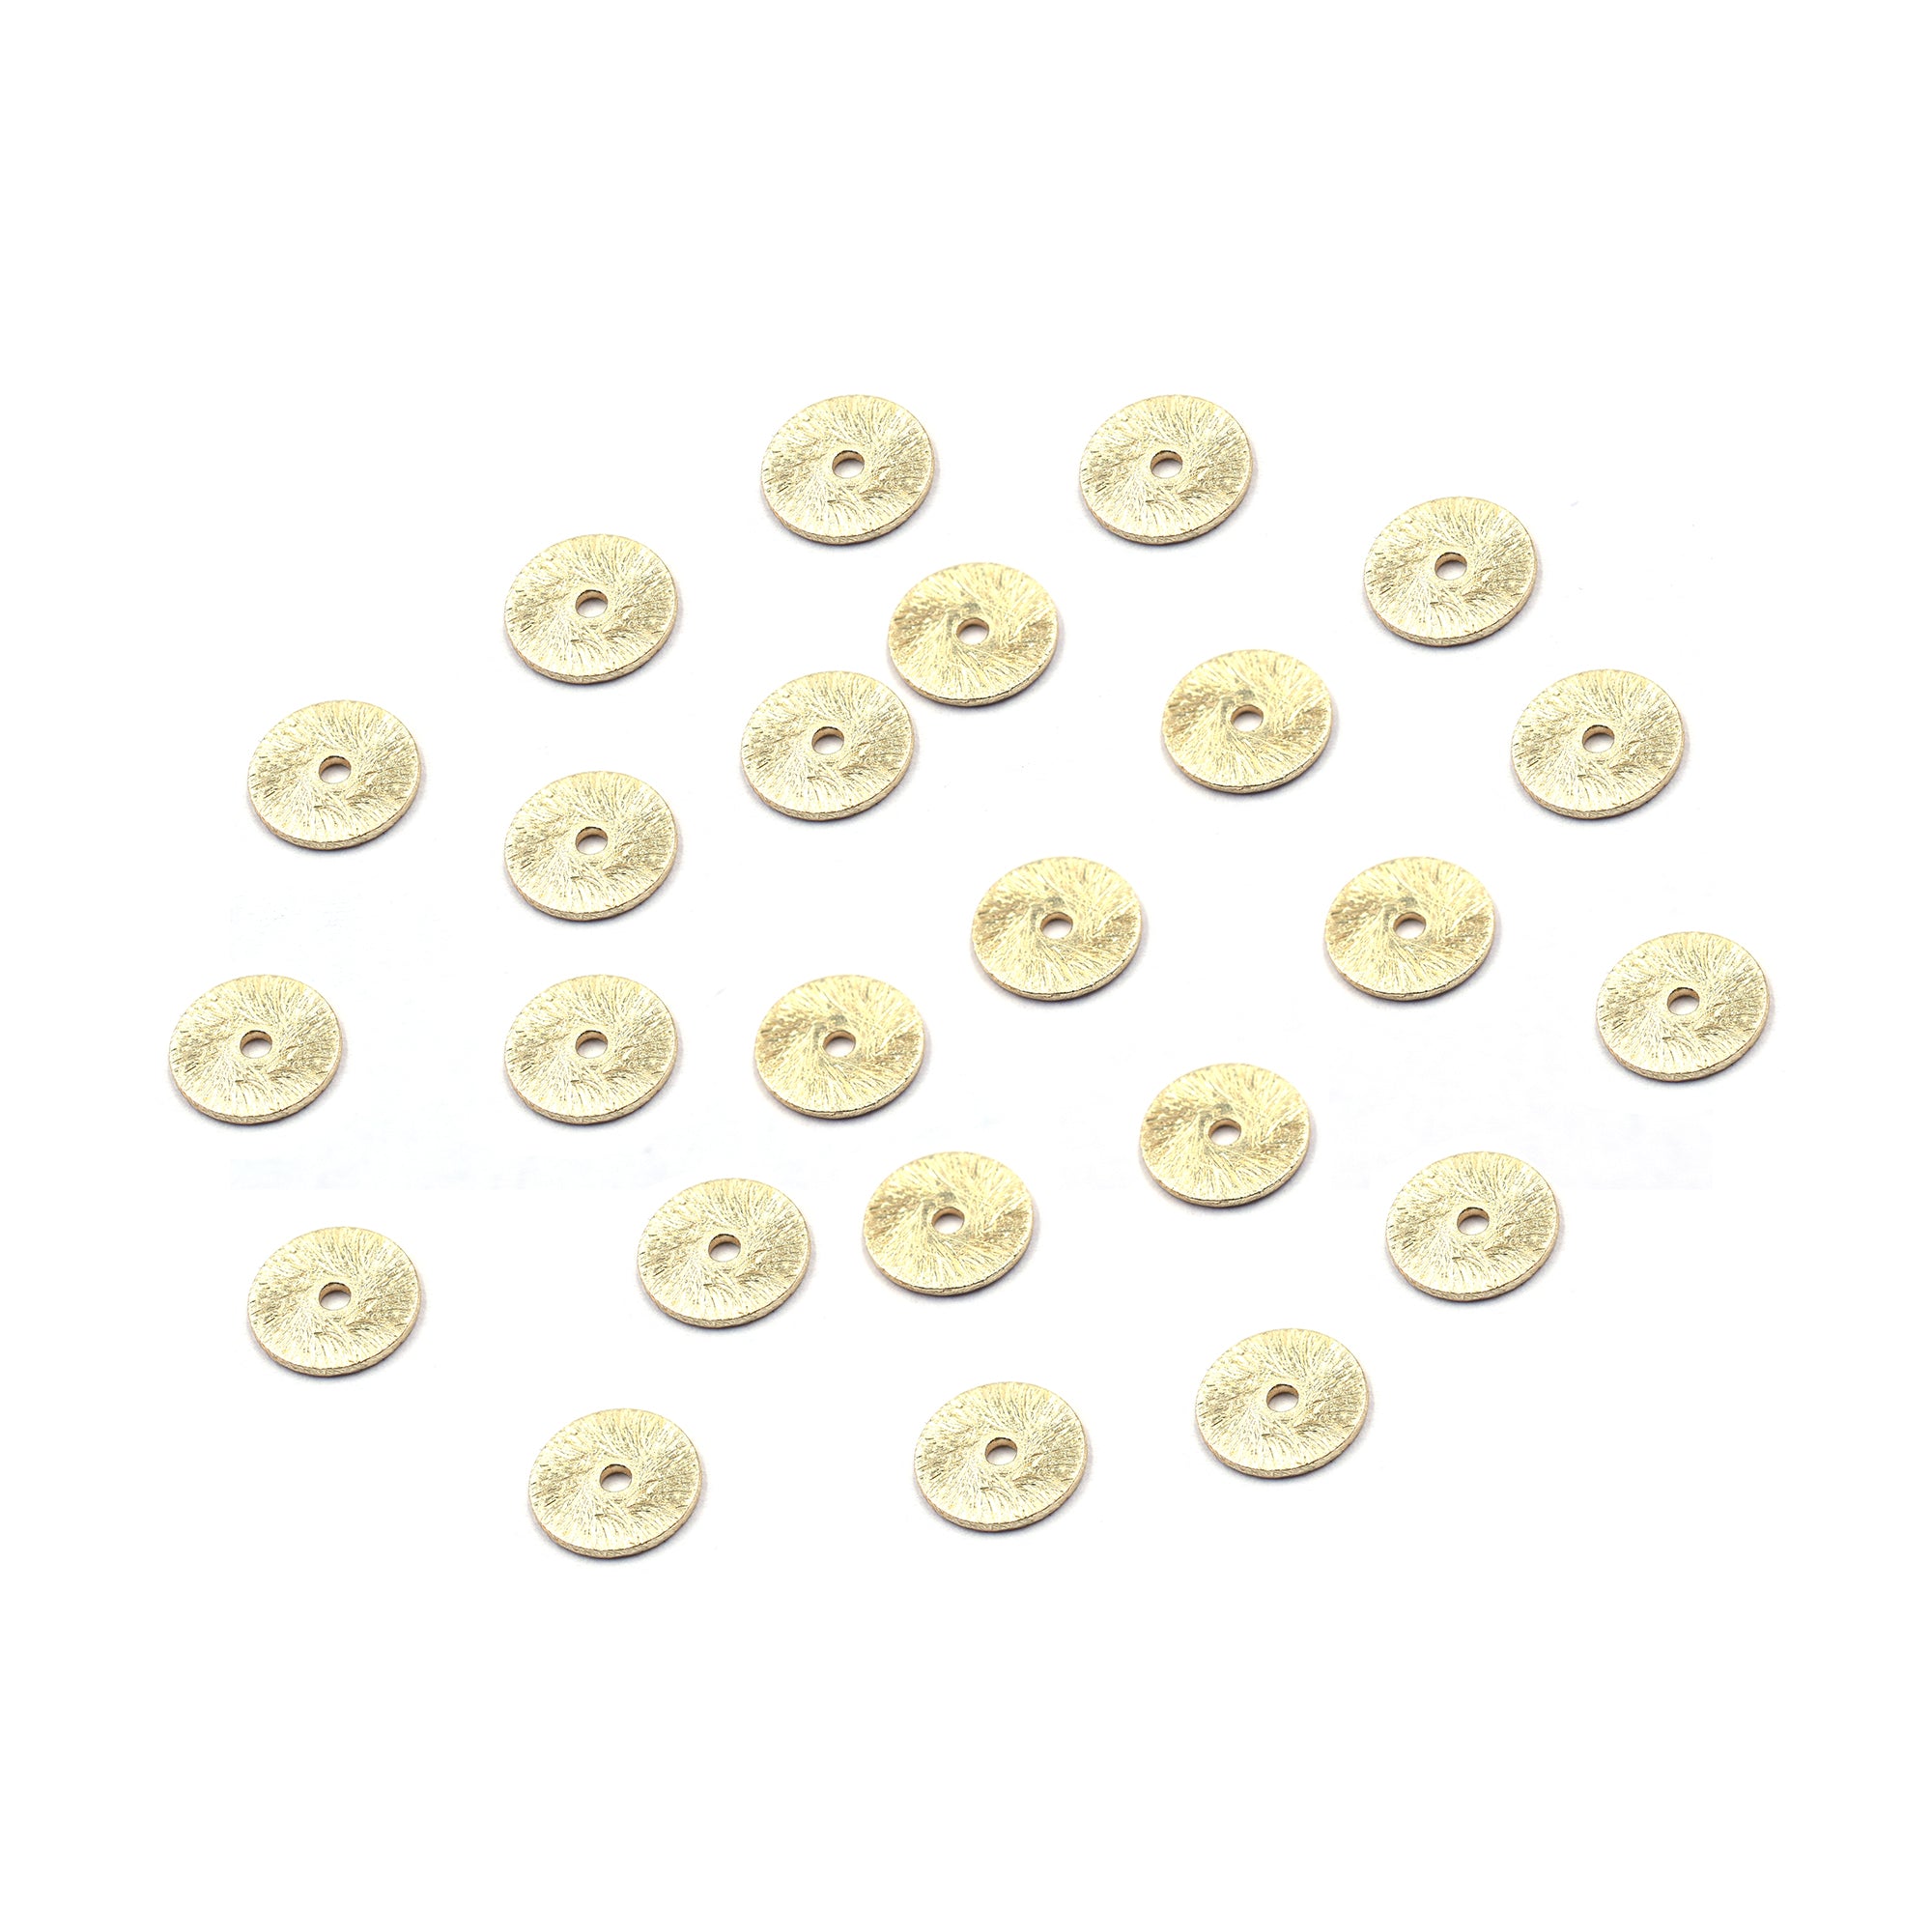 65 Pcs 8mm Flat Wavy Disc Brushed Matte Finish Beads Gold Plated Copper